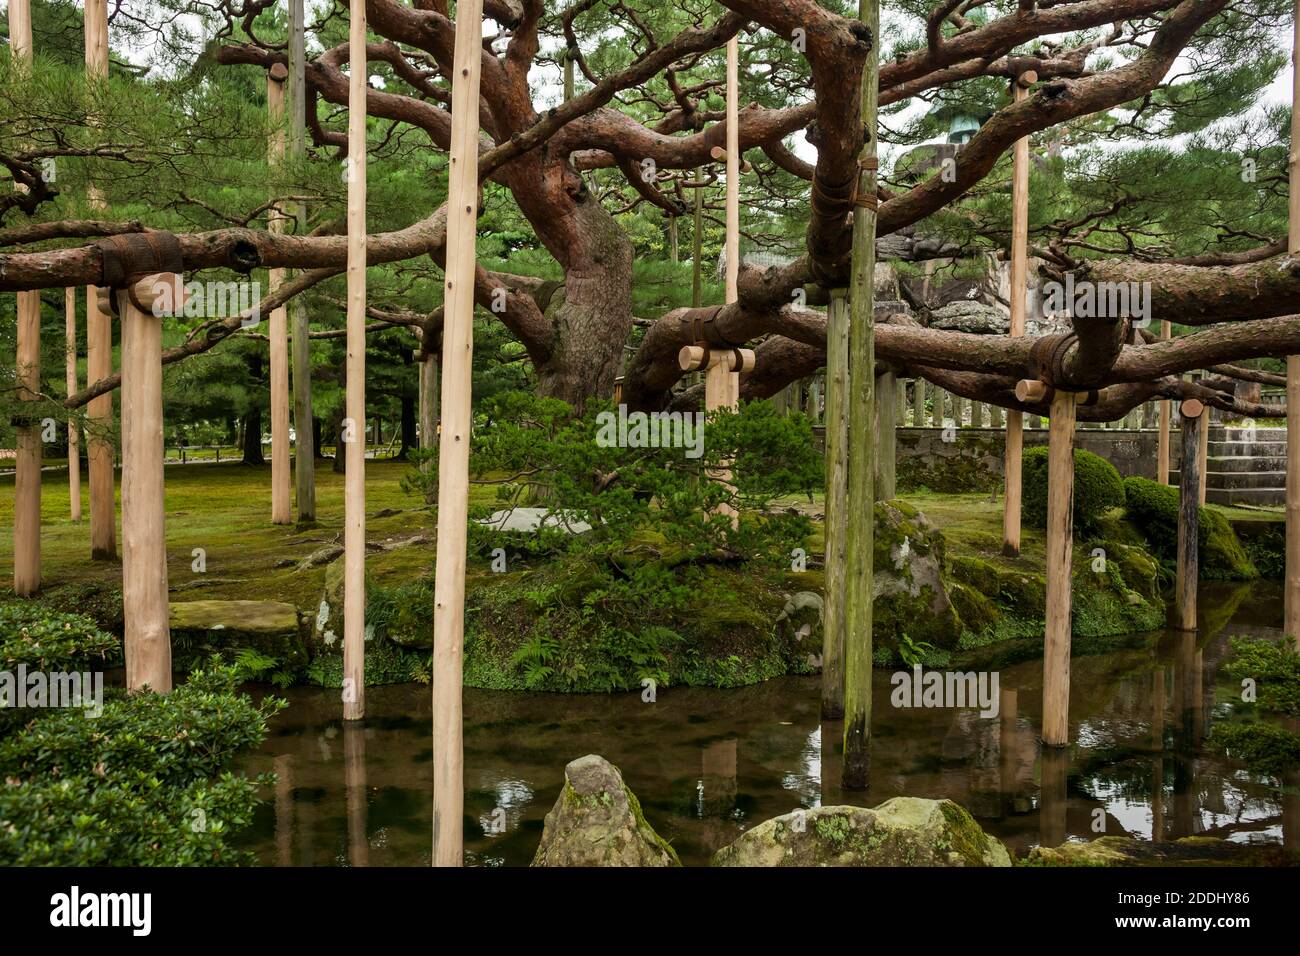 Horizontal view of a magnificent old pine tree with wooden supports in Kenrokuen Garden, Kanazawa, Japan Stock Photo